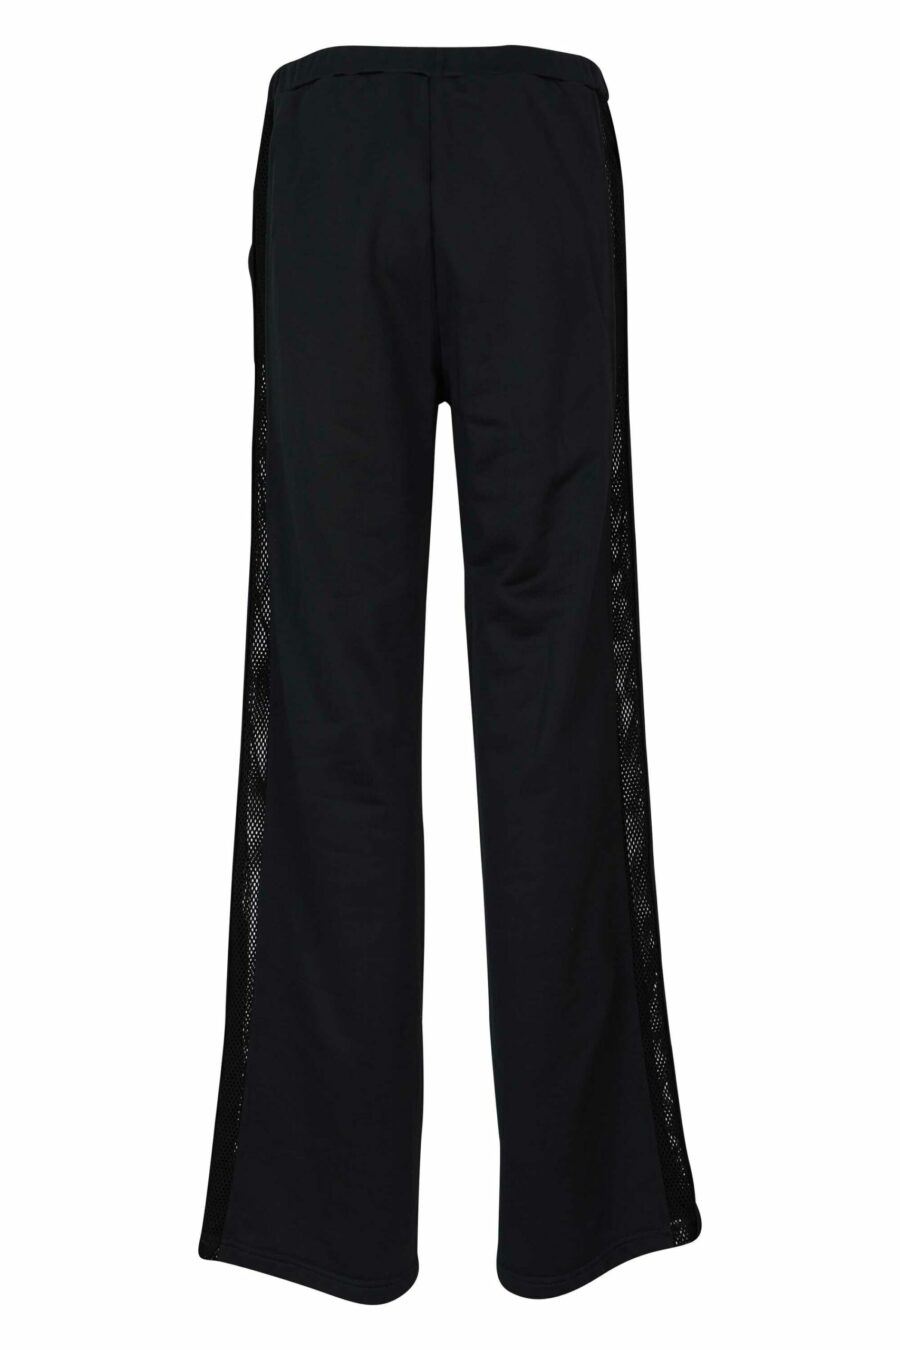 Wide black trousers with logo - 8054148457945 scaled